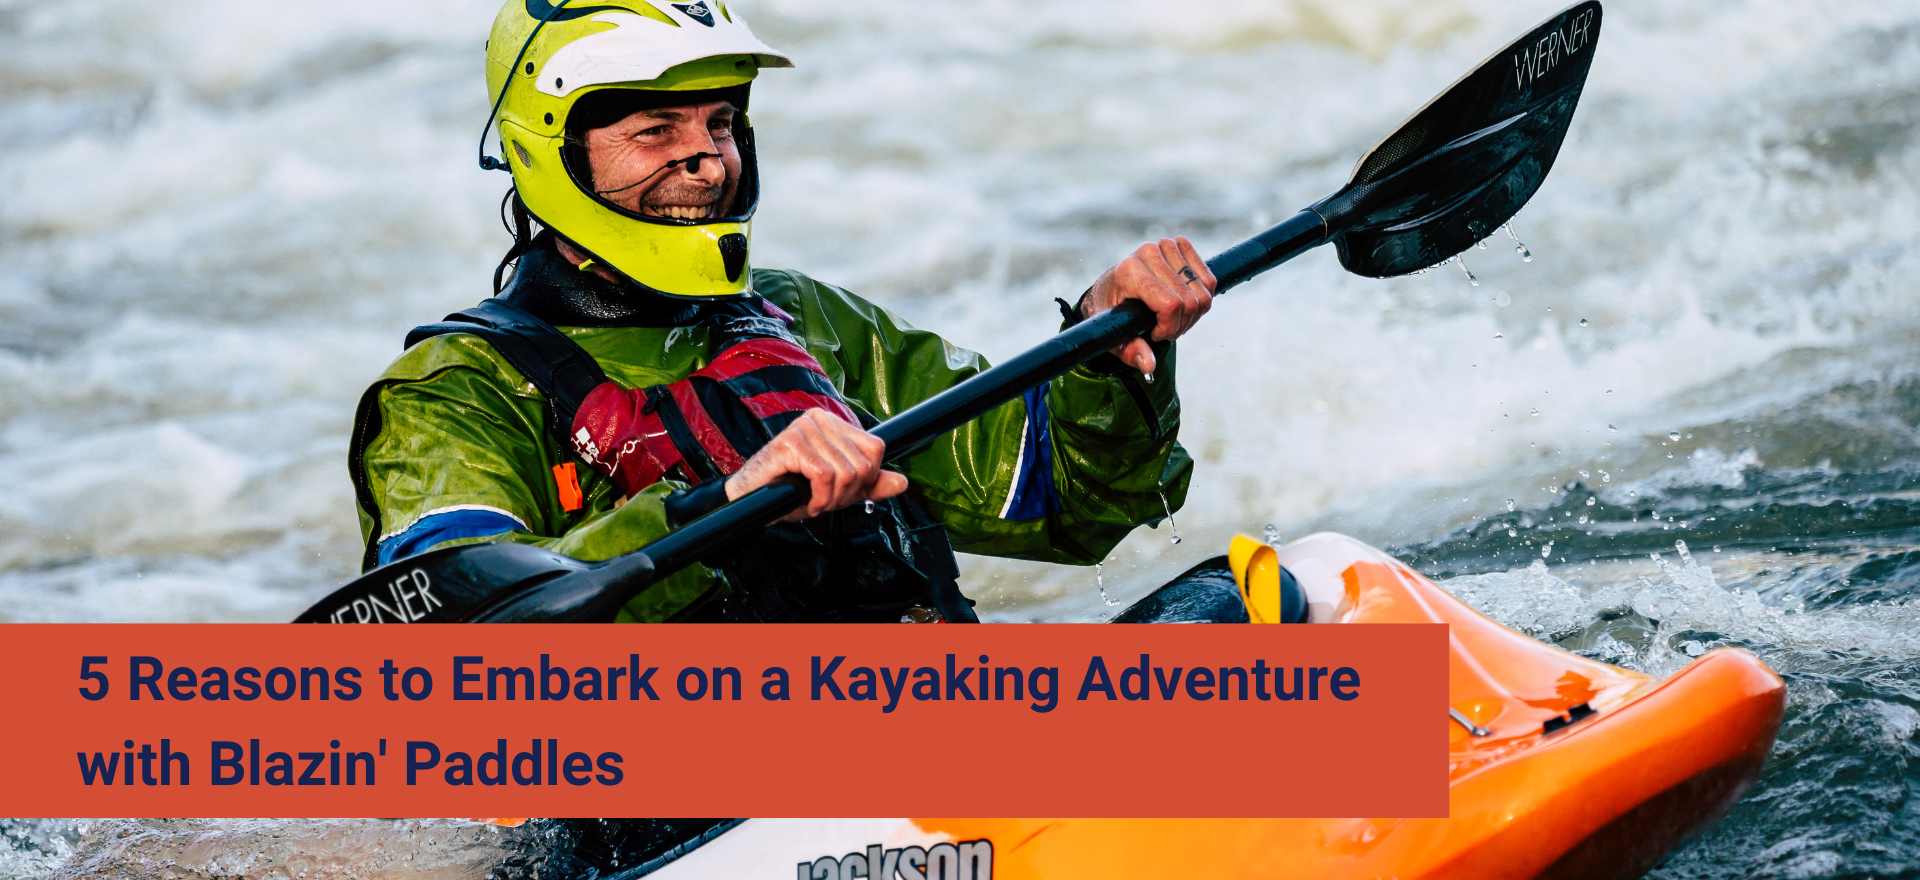 5 Reasons to Embark on a Kayaking Adventure with Blazin' Paddles